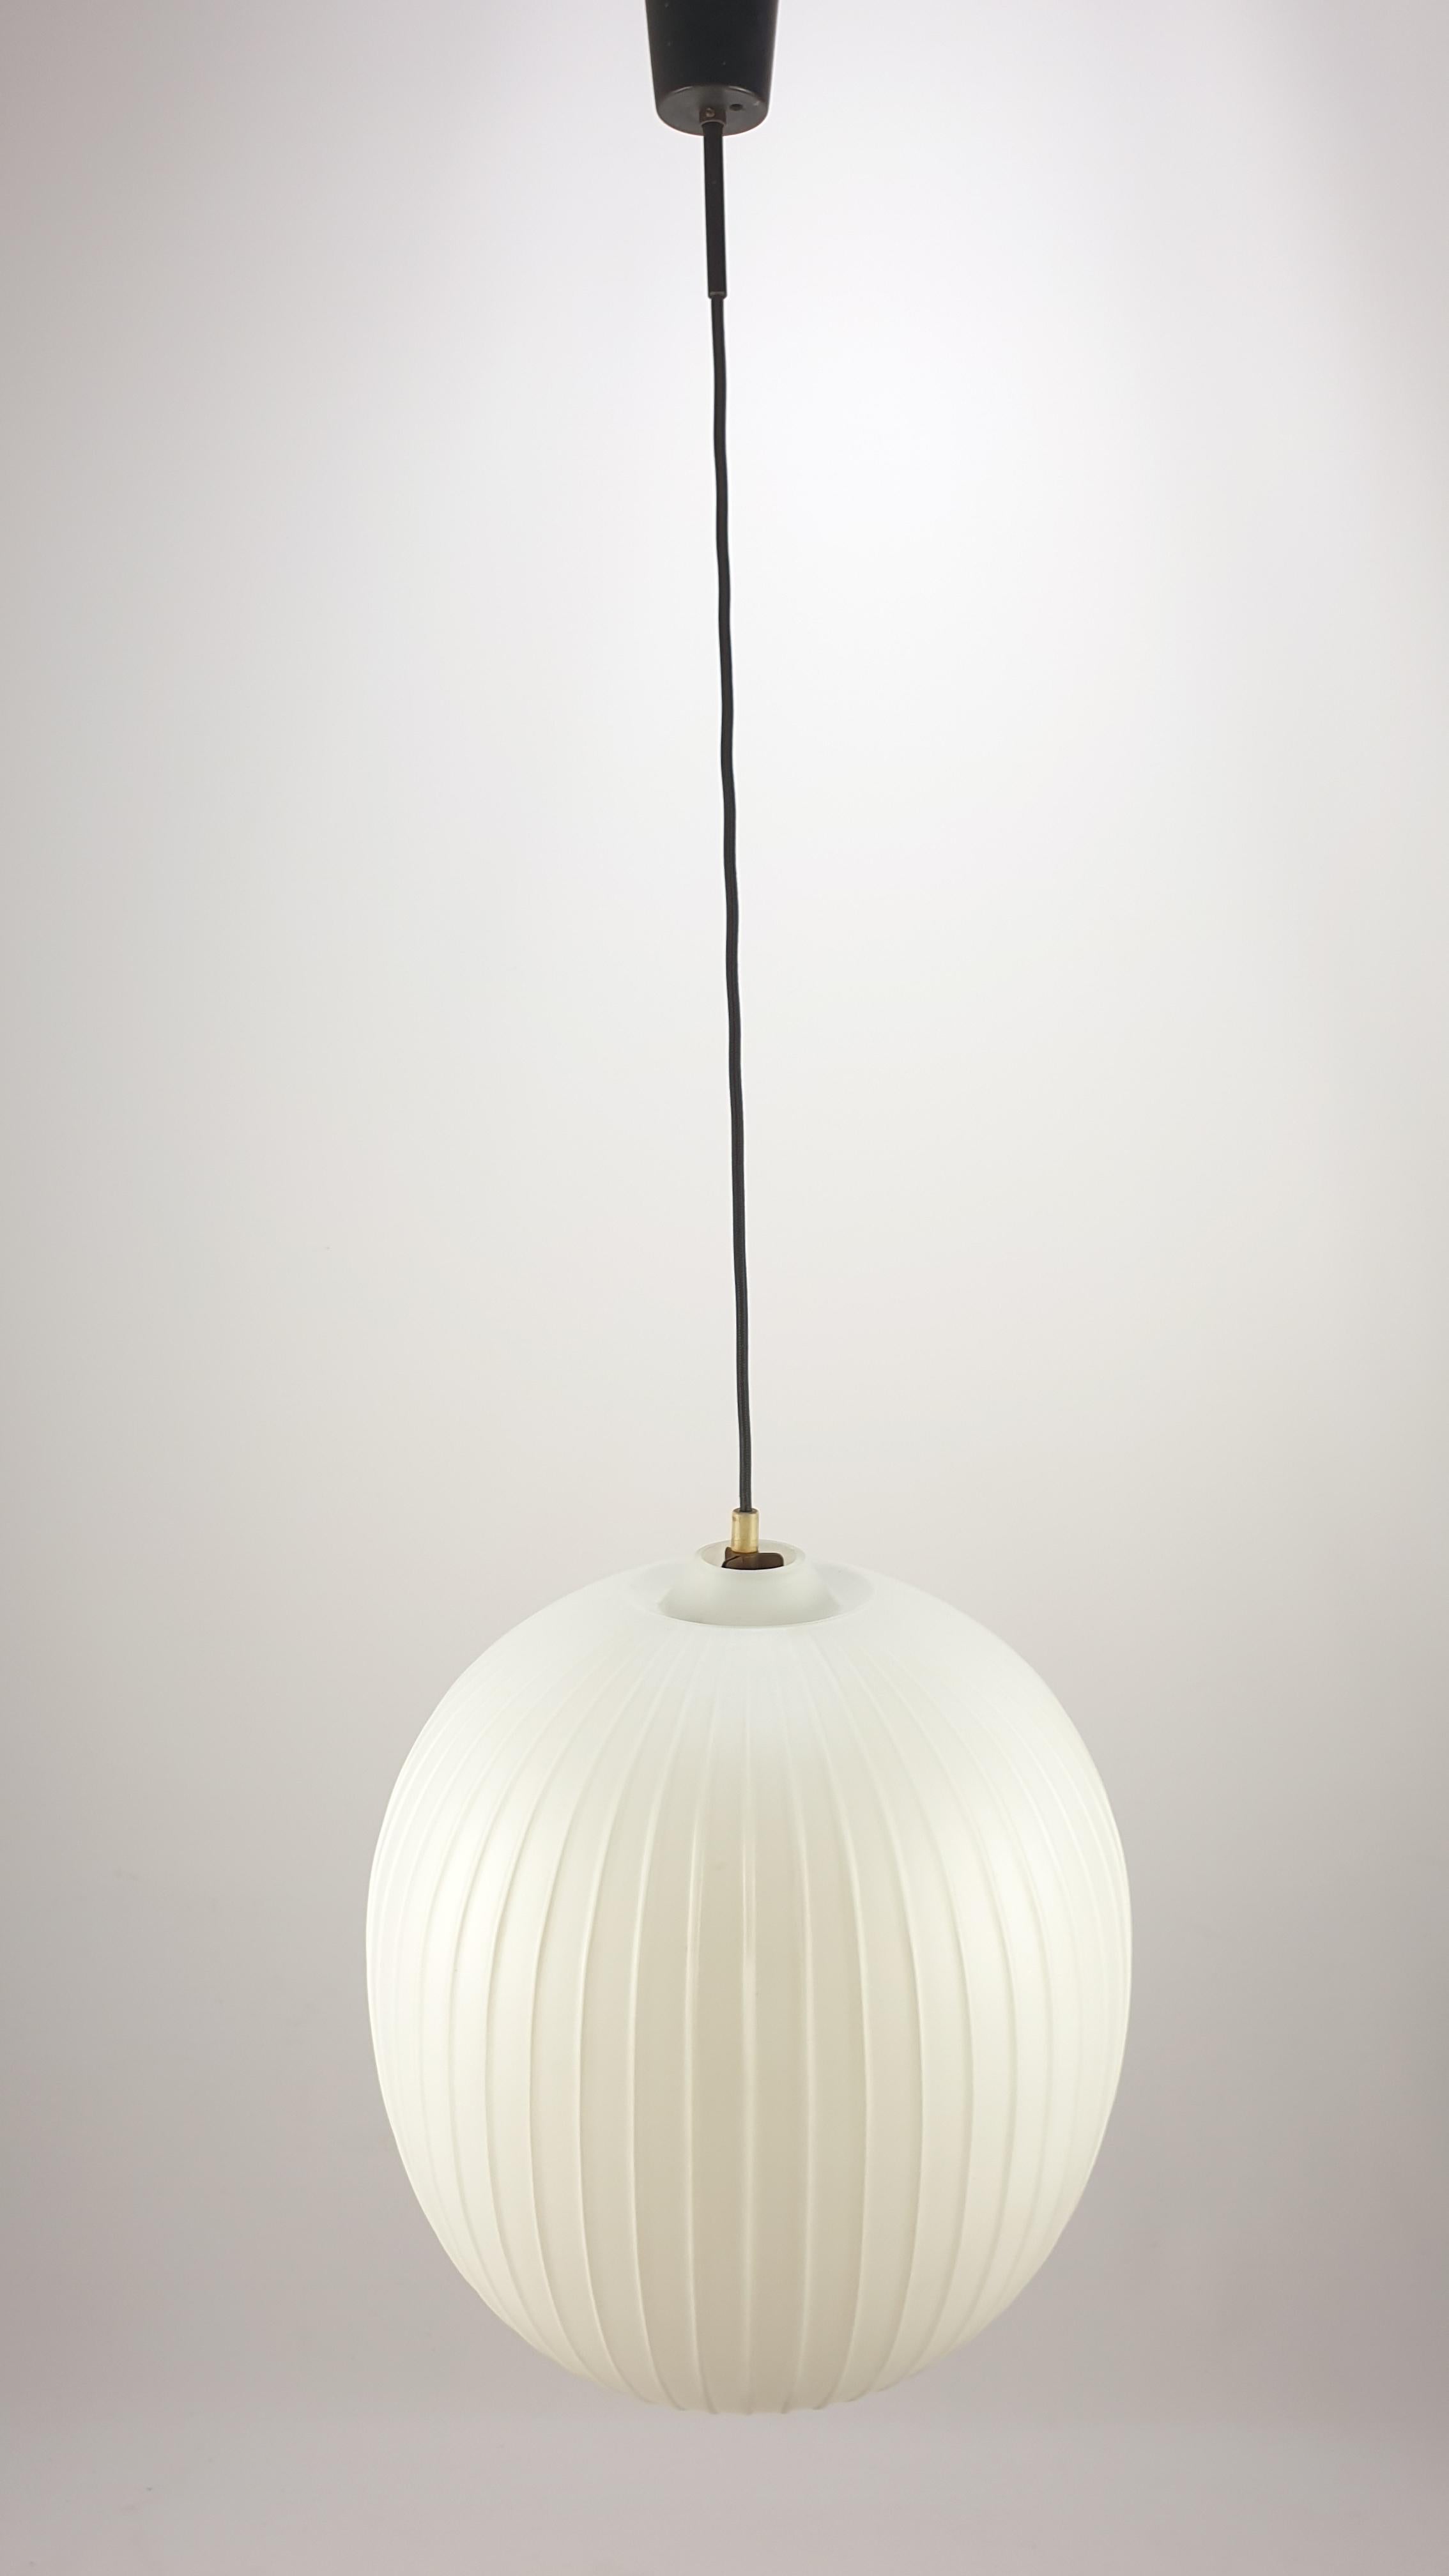 Stunning Italian lamp made by Stilnovo in the 50's. 

Elegant pendant lamp with striped satin white glass and brass accents. 
See the lovely details on the pictures.

The lamp gives a wonderful atmosphere in your room.

The size of the glass